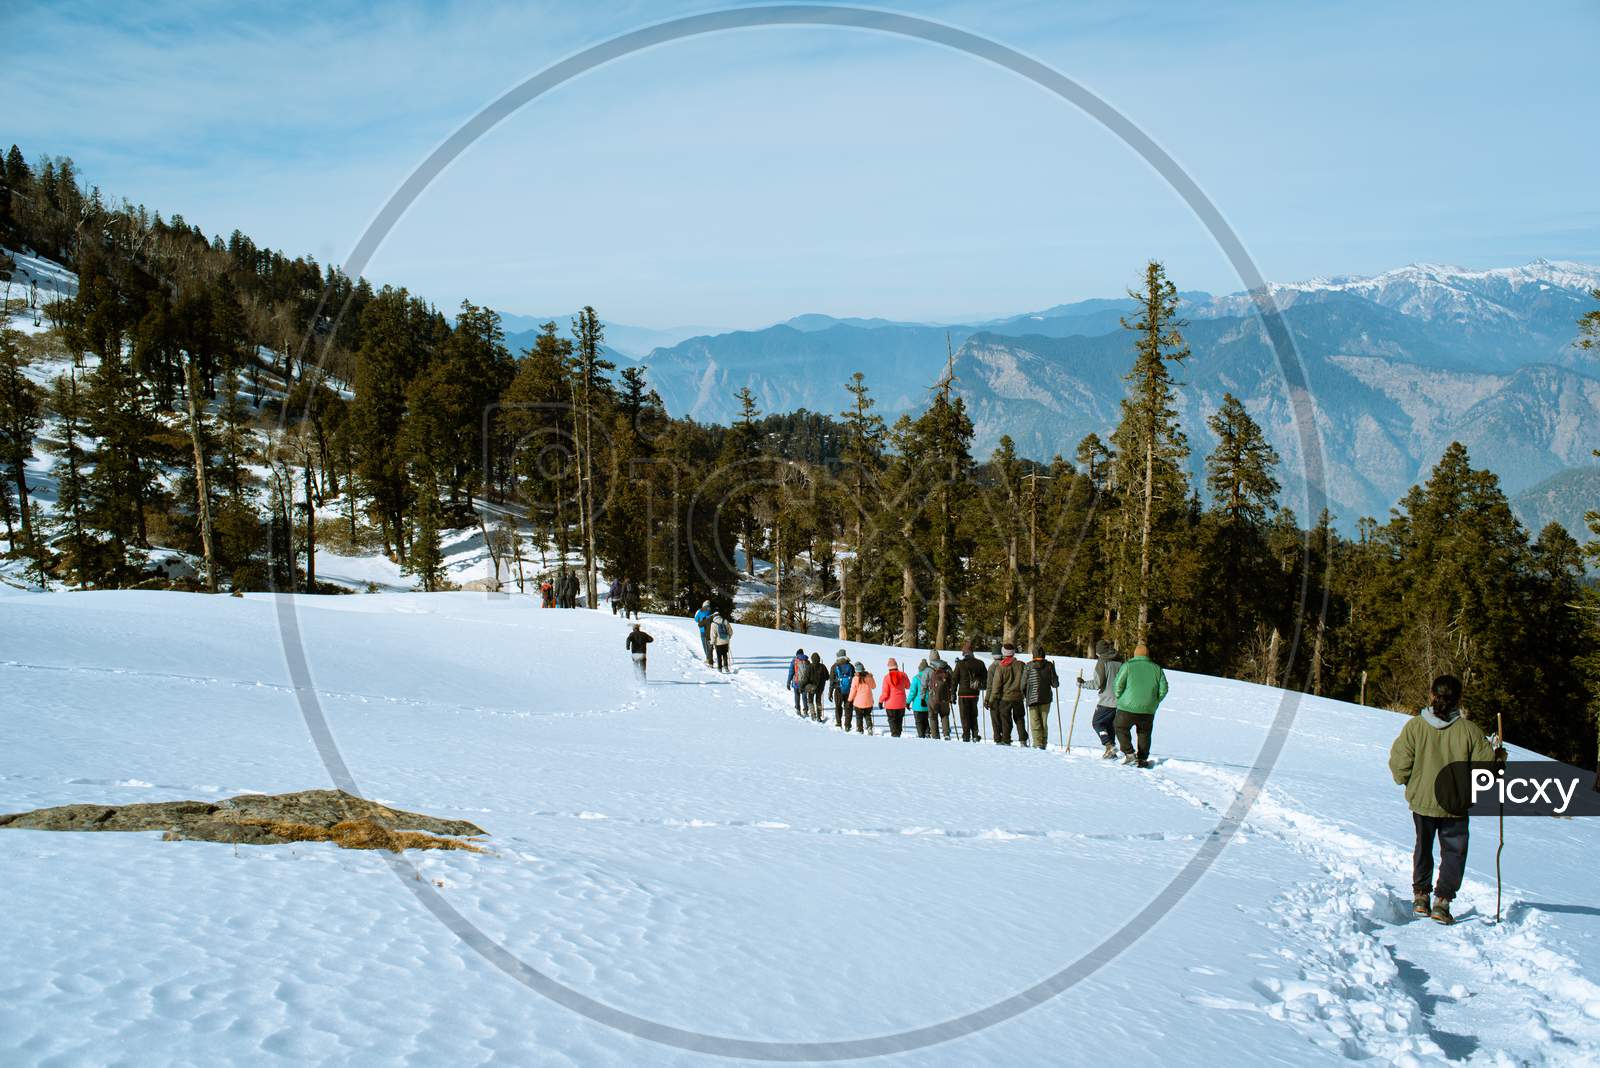 Winter trekking in snow-capped mountains of Himalaya